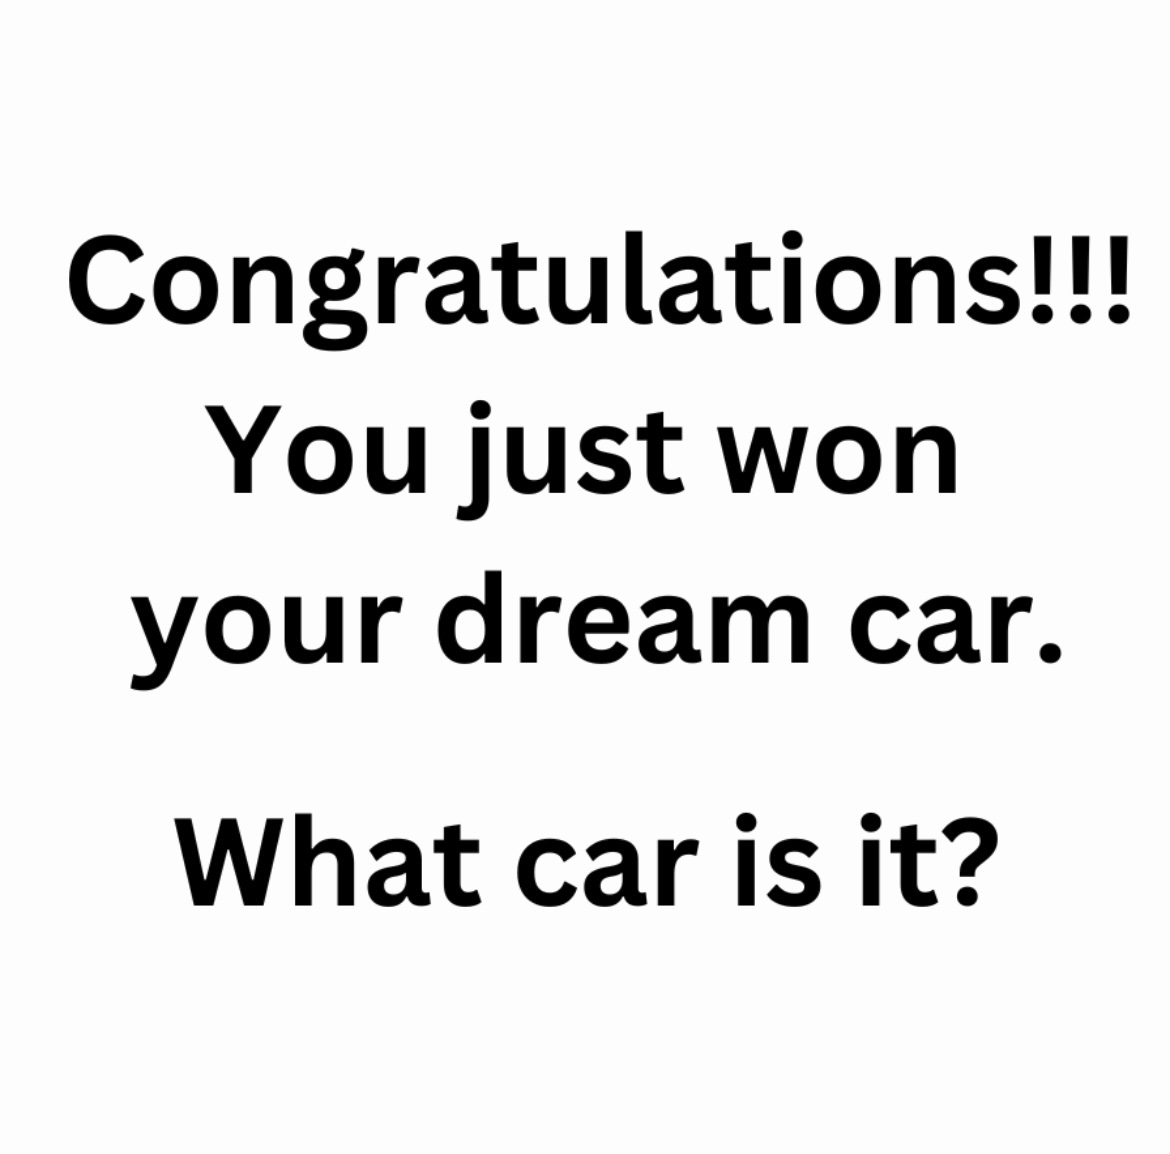 I am not really into cars in a way that I have a 'dream' one. How about you?